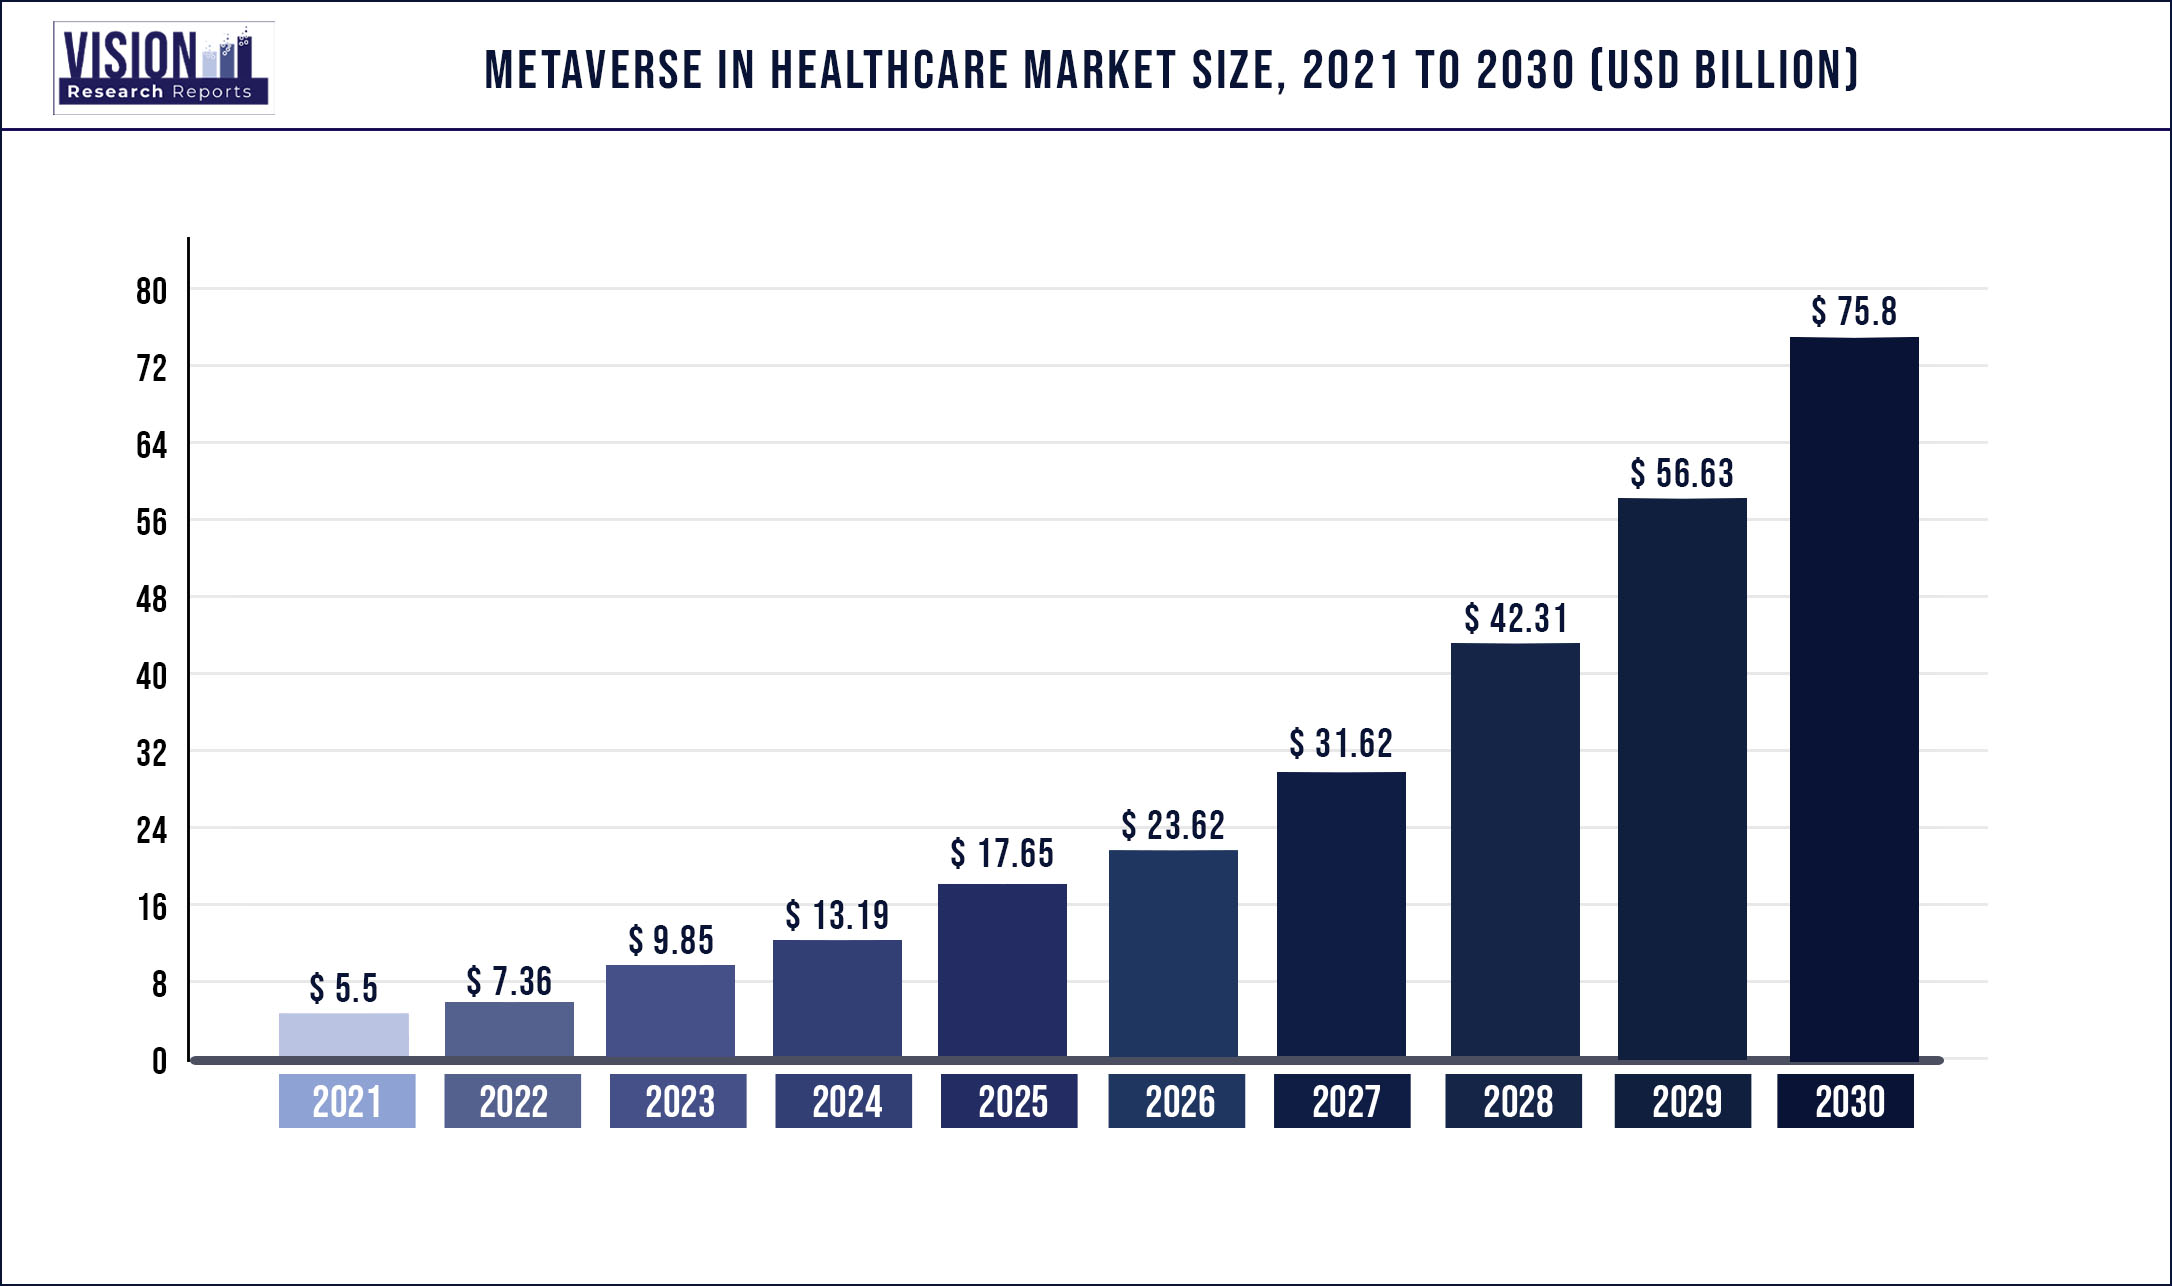 Metaverse in Healthcare Market Size 2021 to 2030